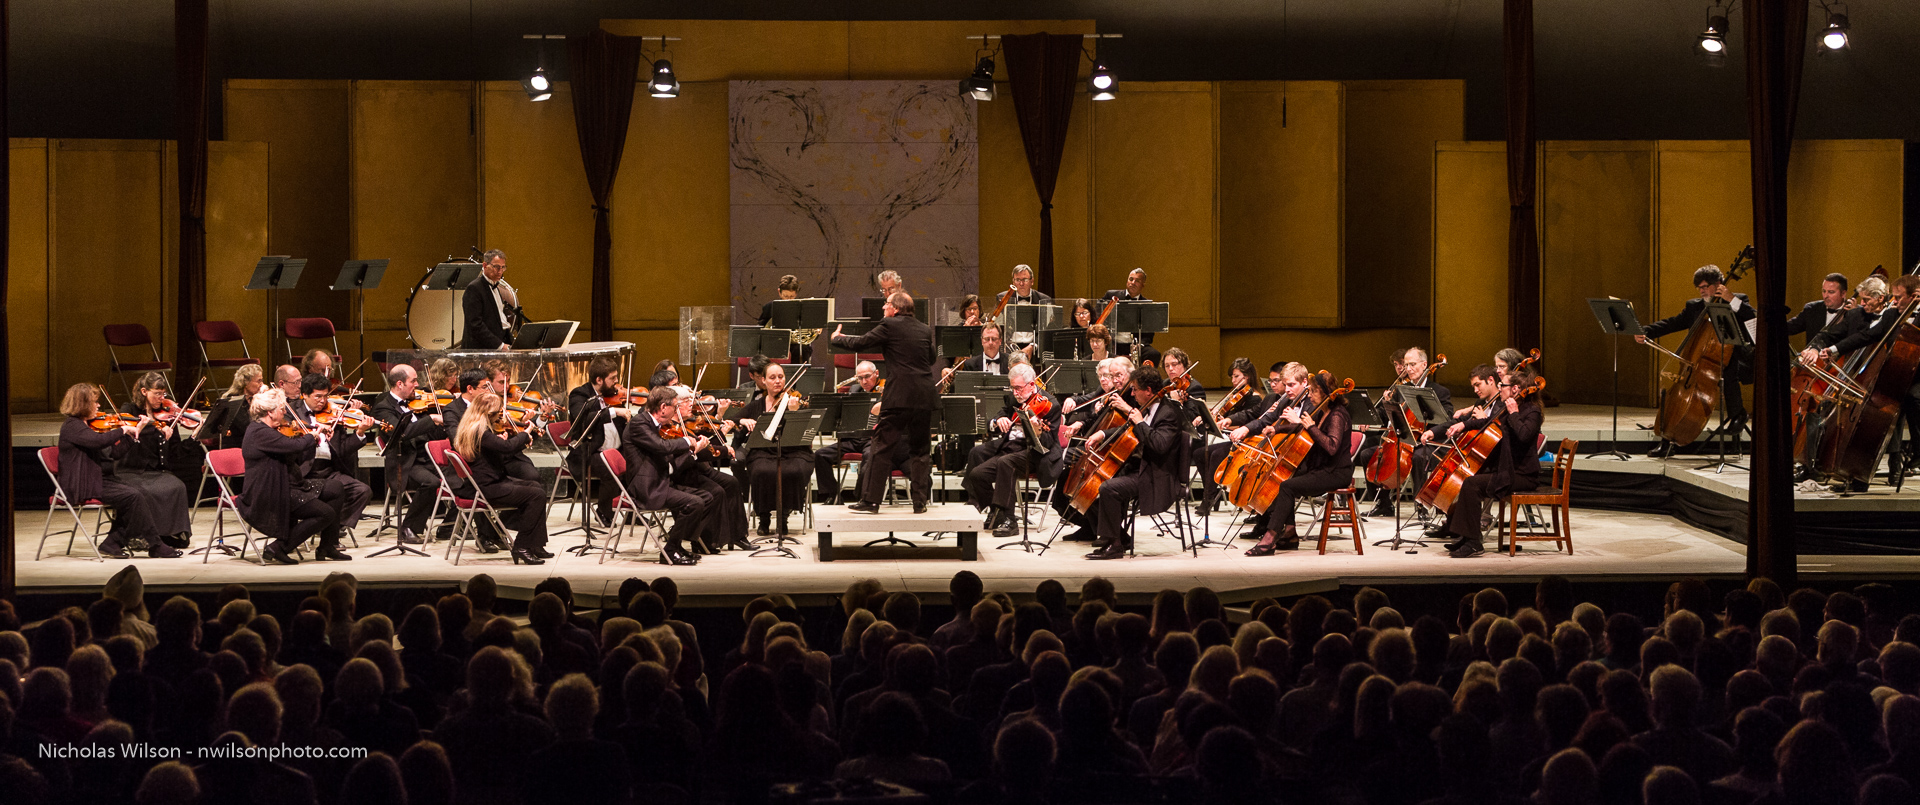 The Mendocino Music Festival Symphony Orchestra in performance during their second concert of the 2015 season.